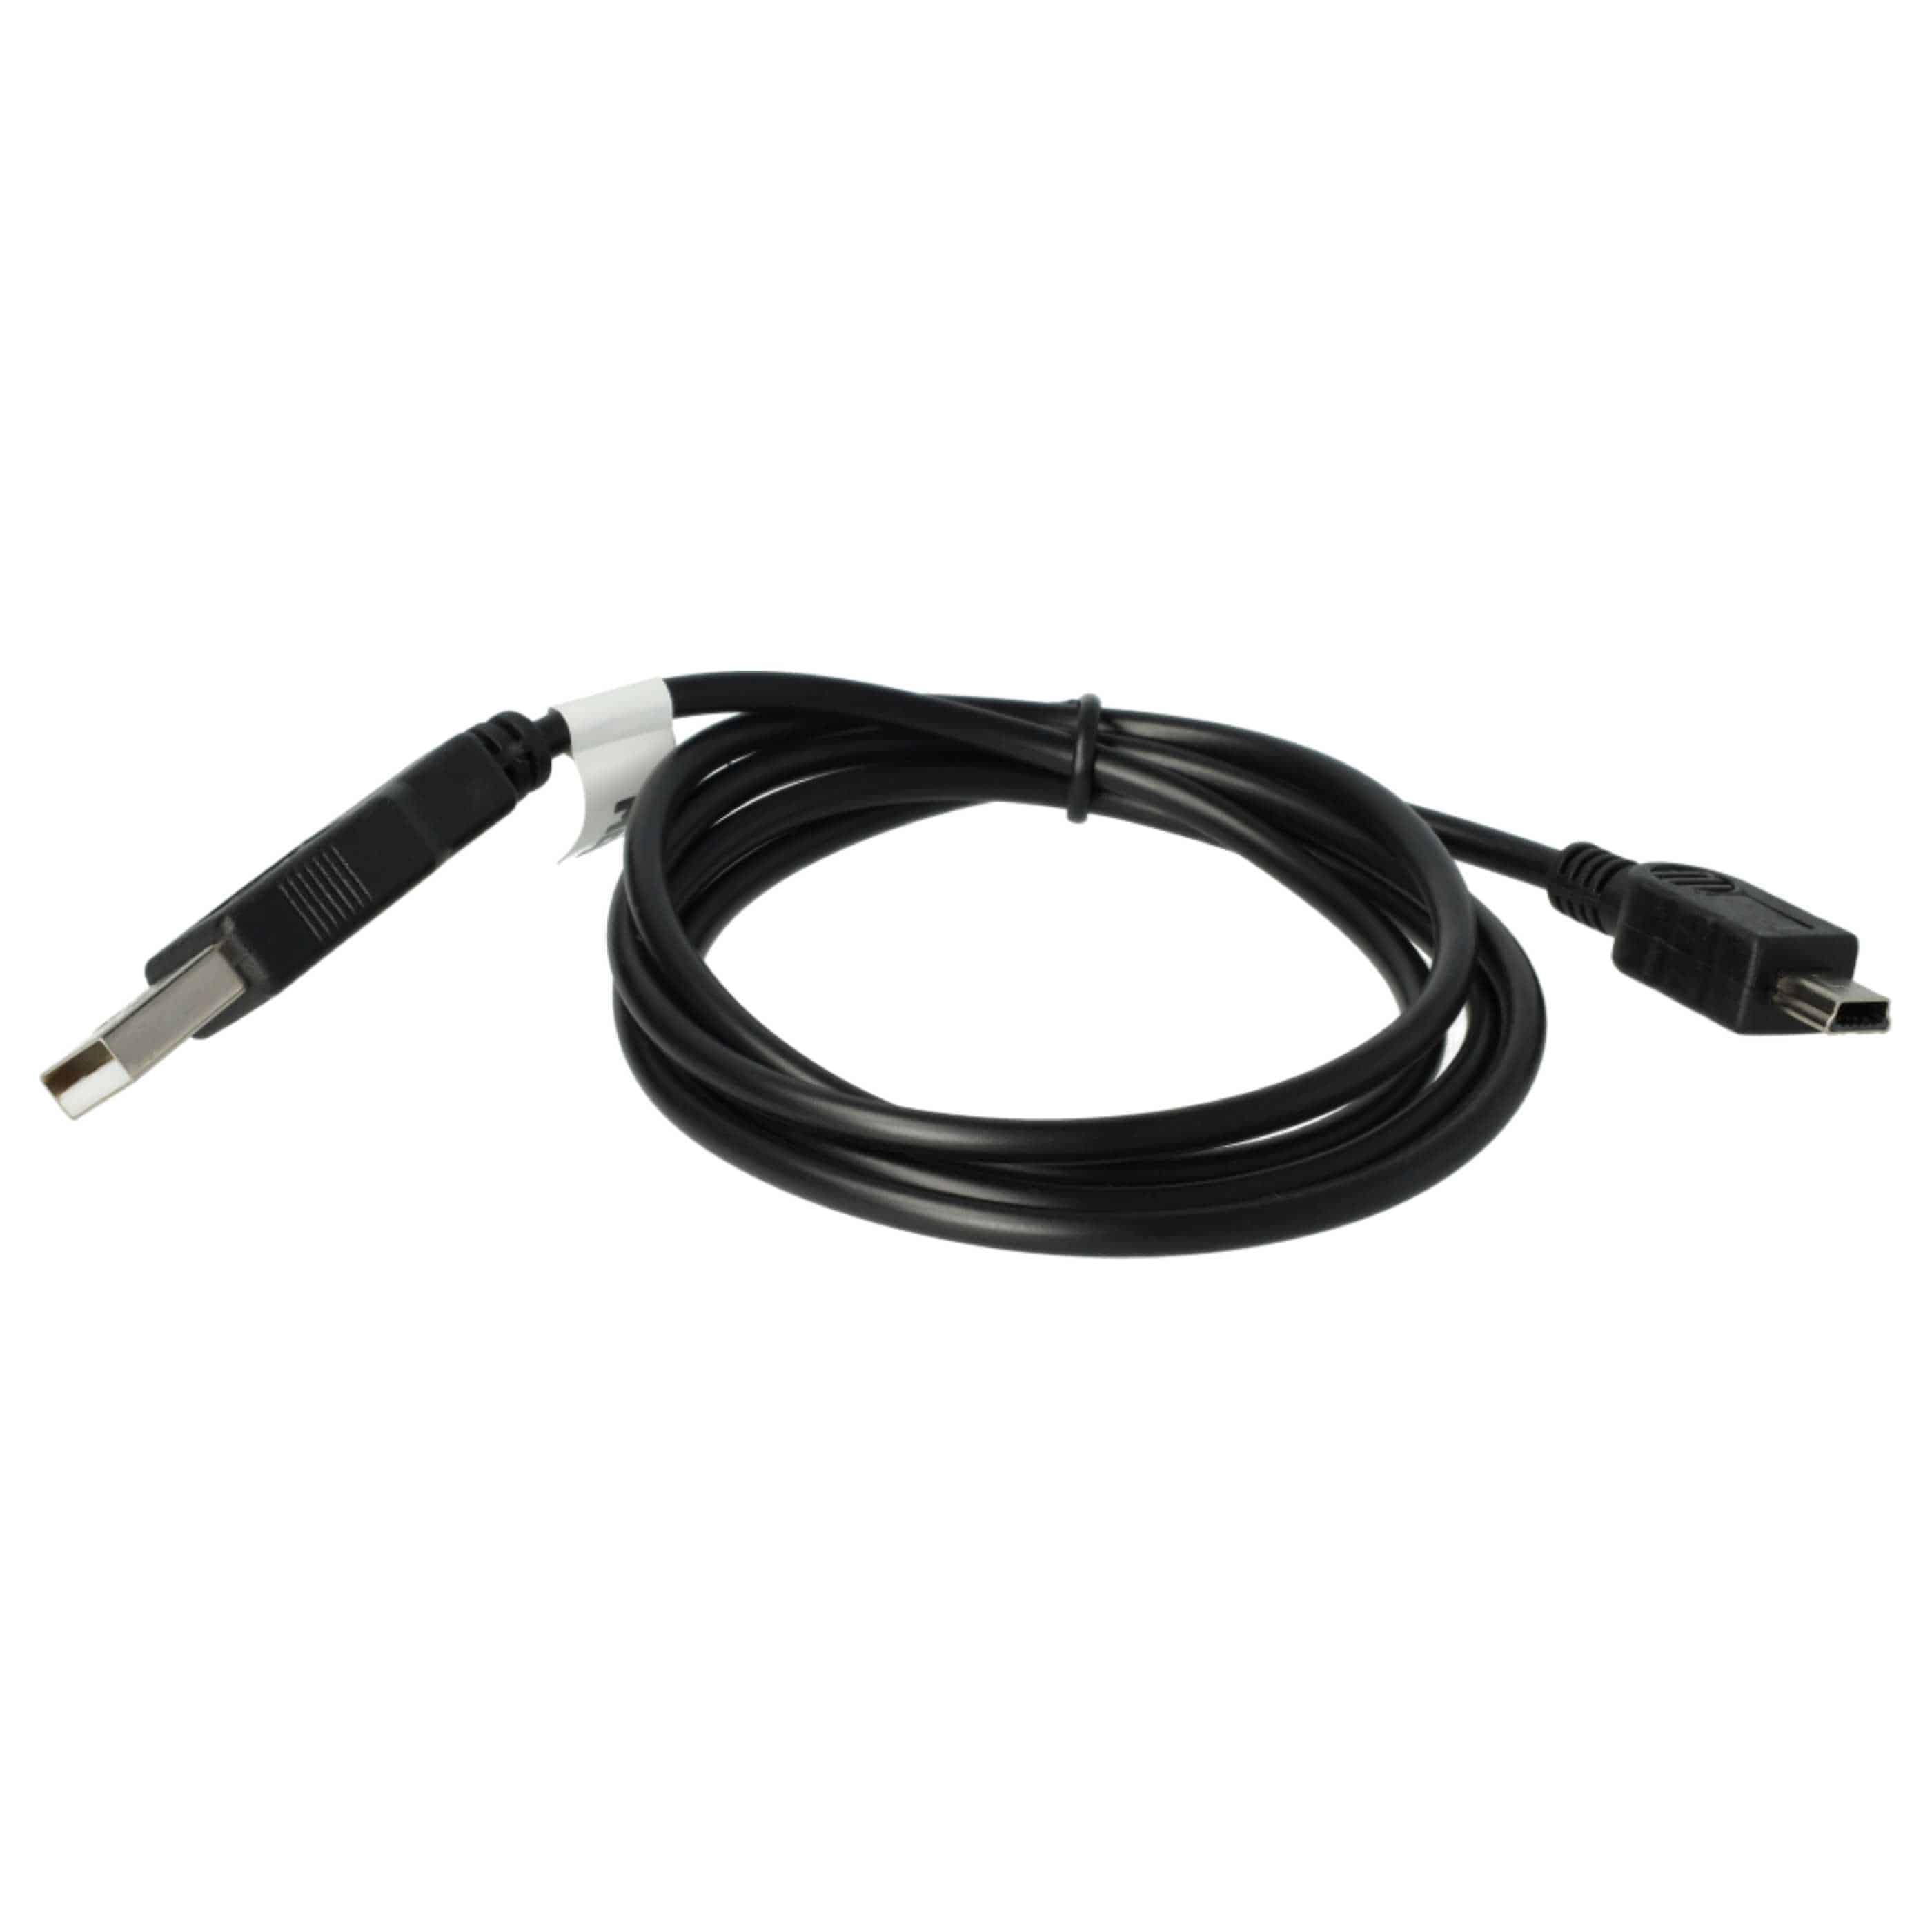 USB Data Cable 2in1 Charger e.g. for Mustek PVRH 140 GPS Sat-Nav Devices